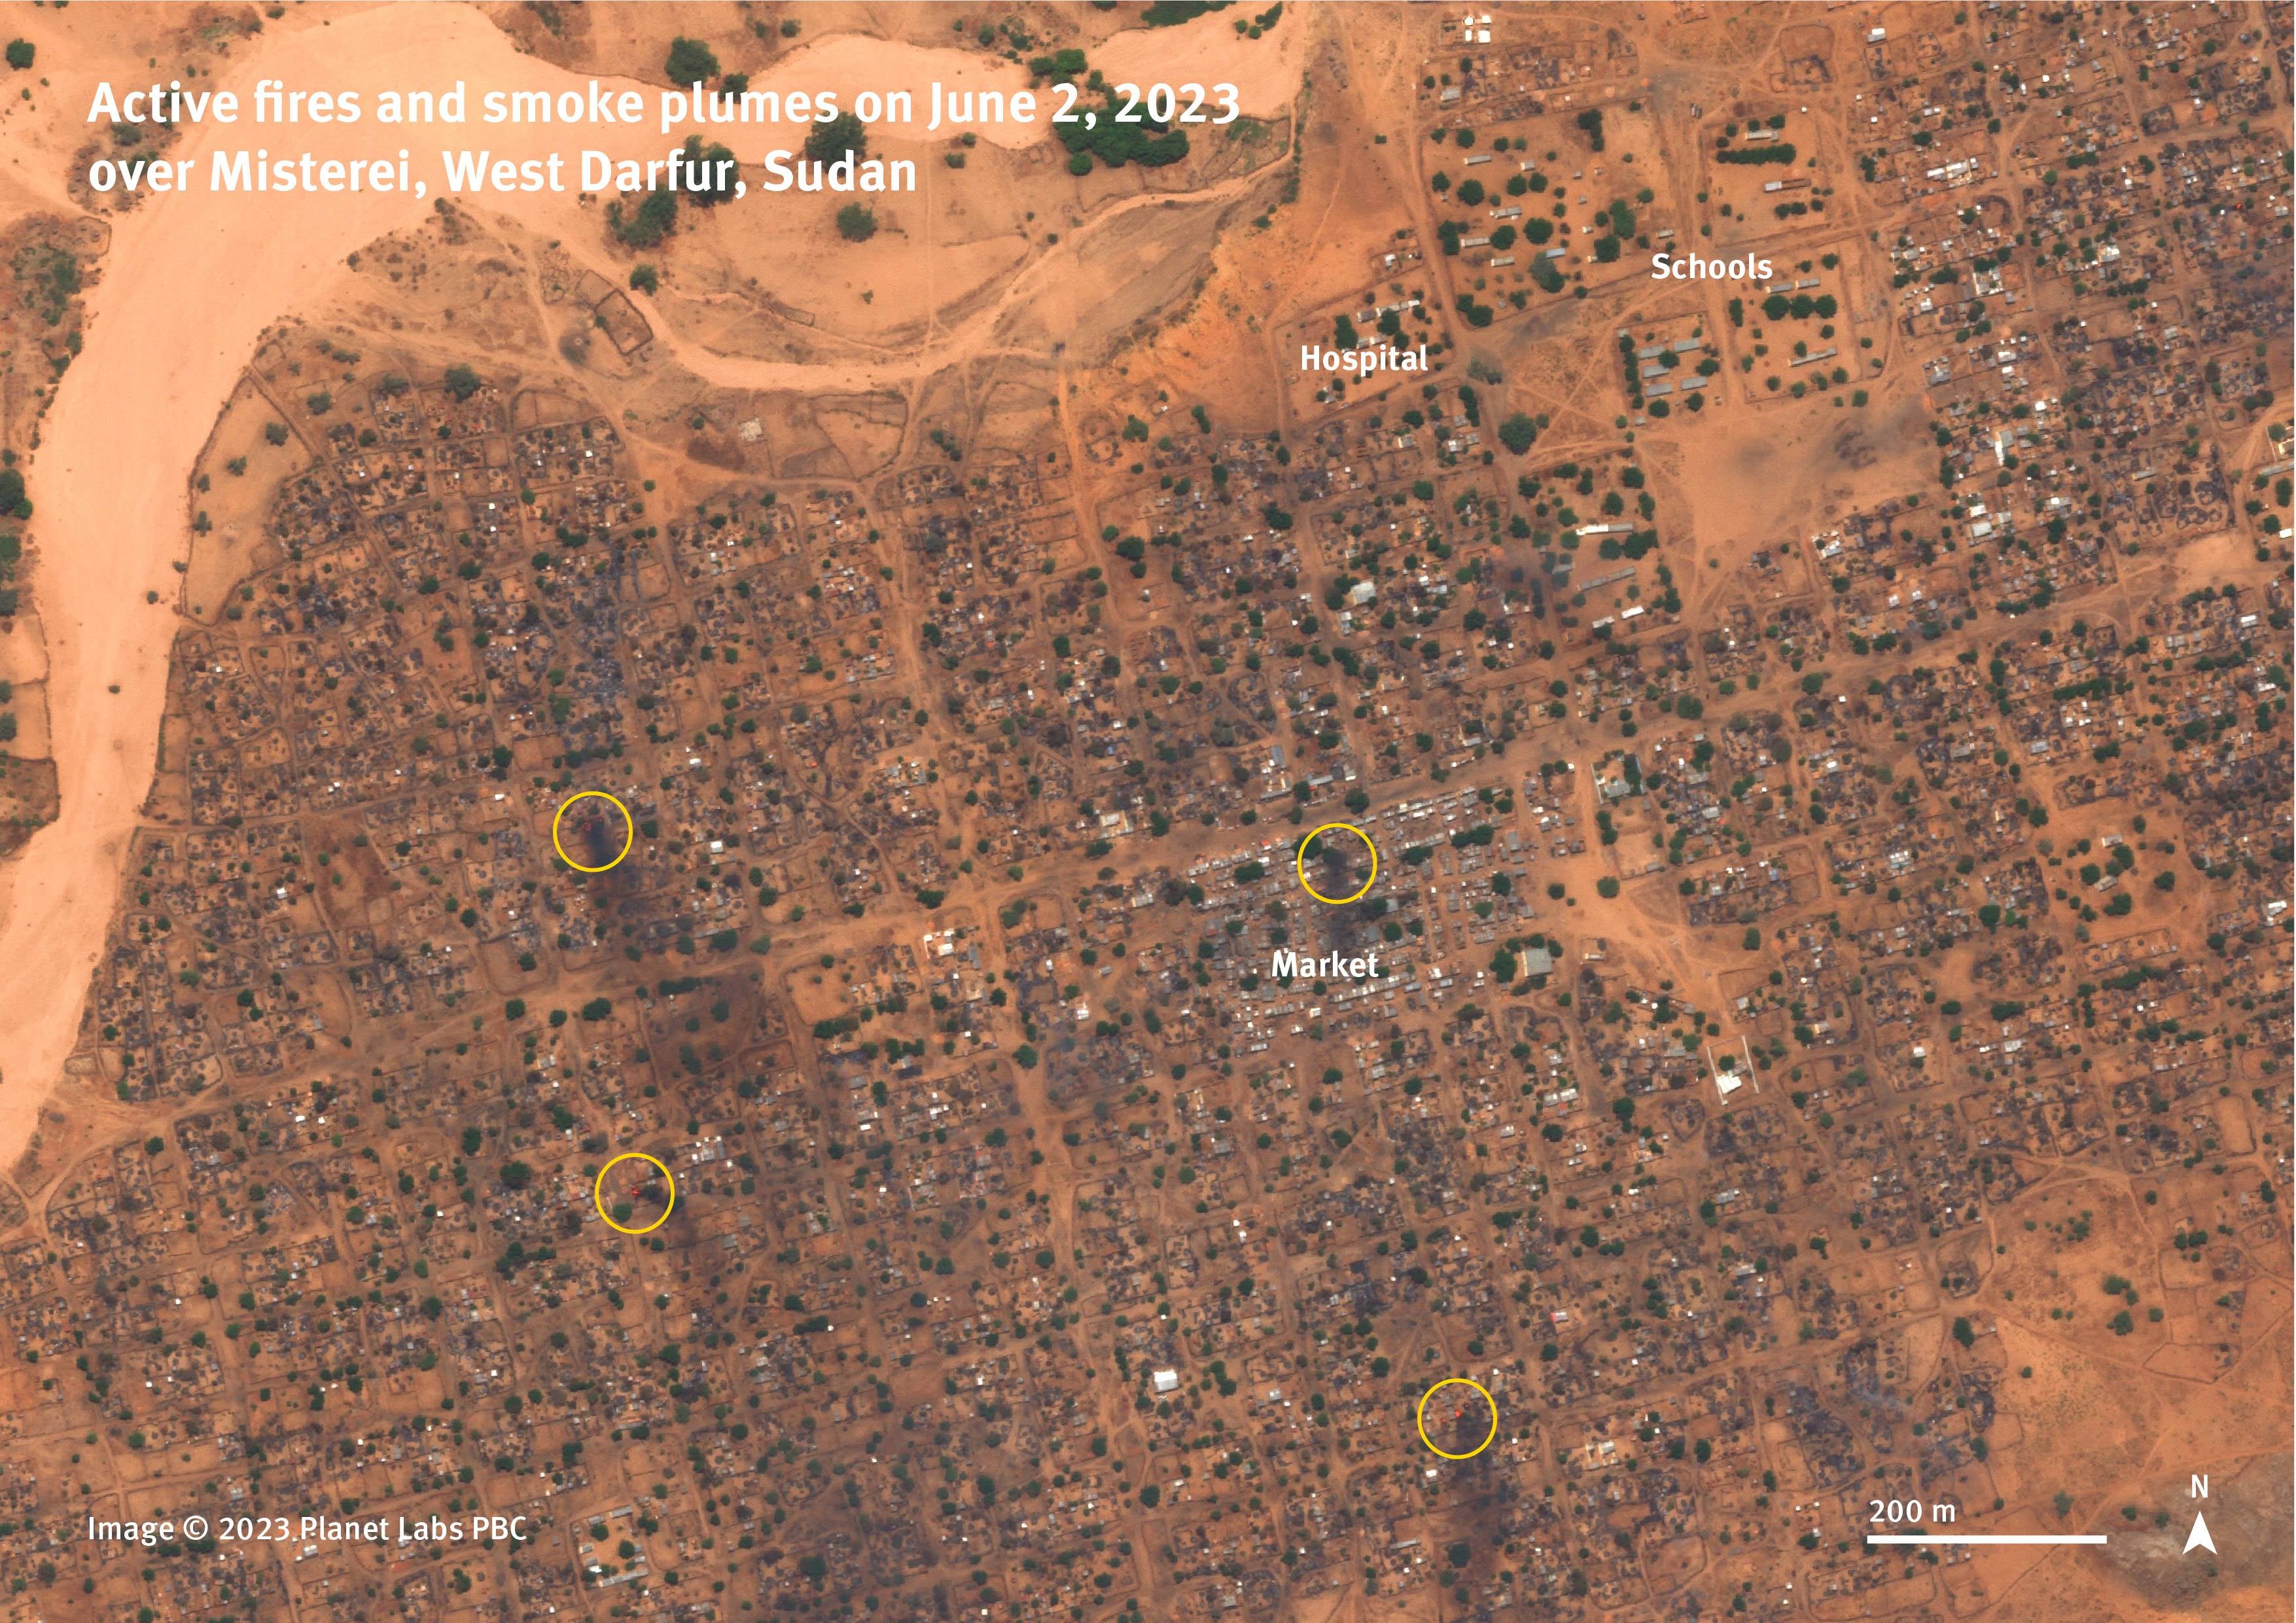 Satellite imagery of June 2, 2023 shows several active fires and smoke plumes over the town of Misterei, West Darfur, Sudan. 